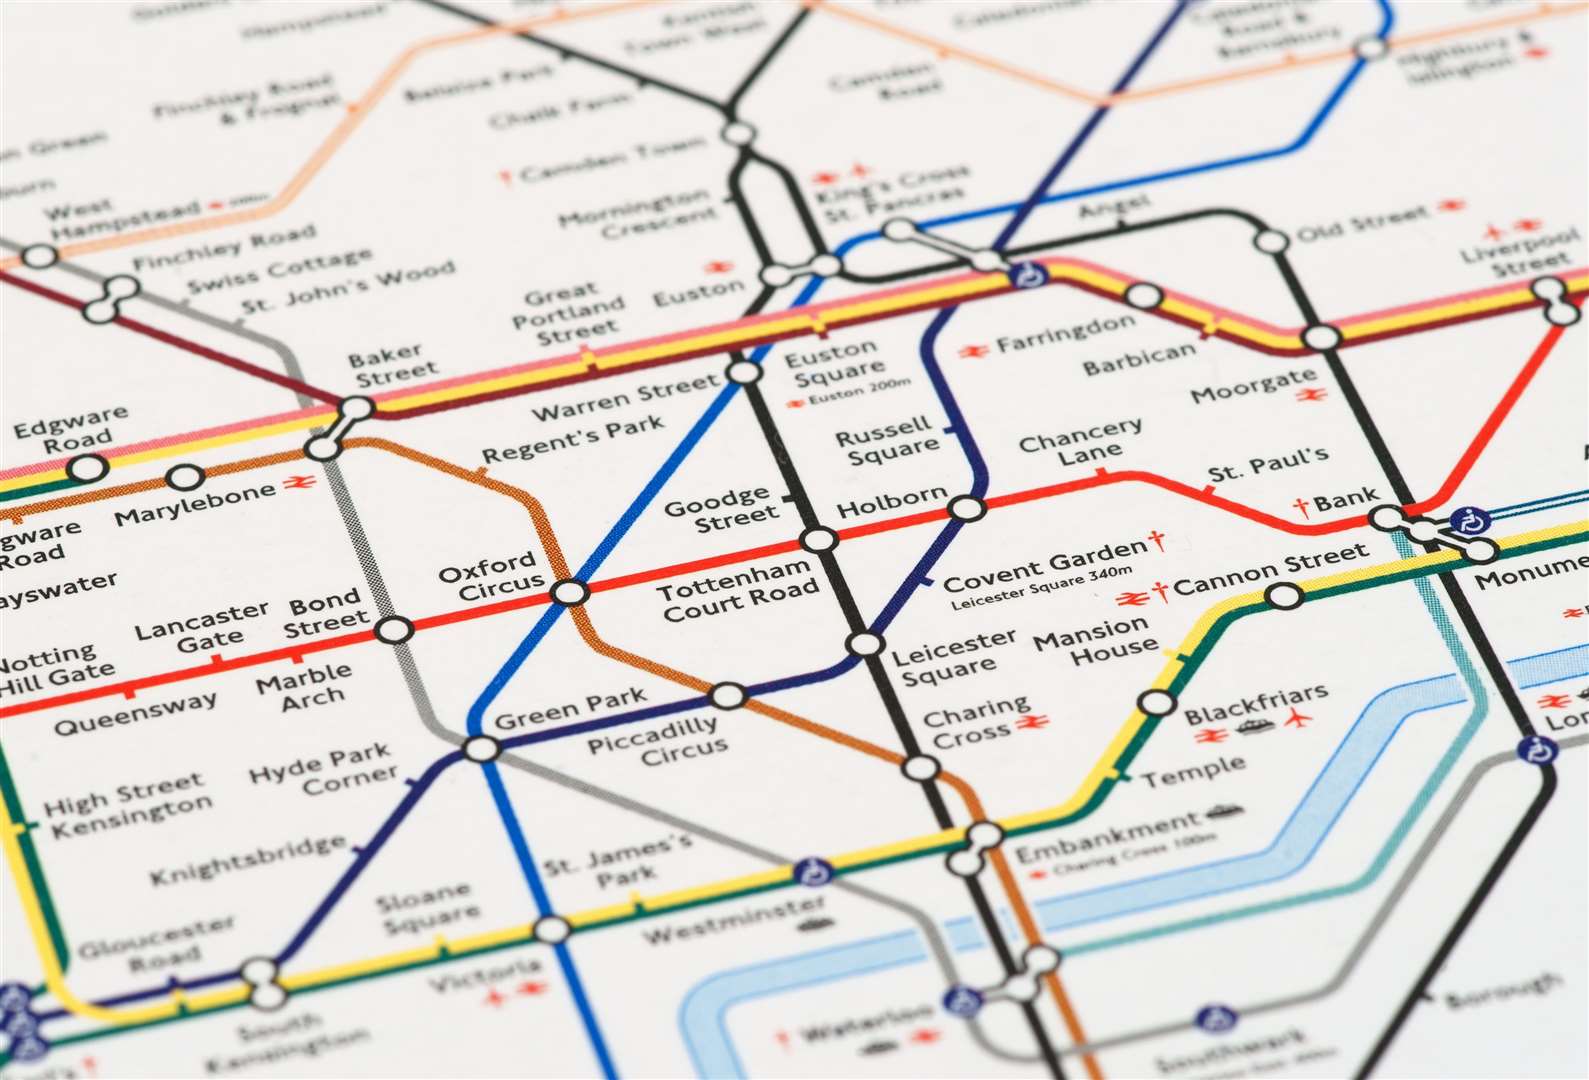 The TfL app will give you real time journey information on the day. Image: iStock.